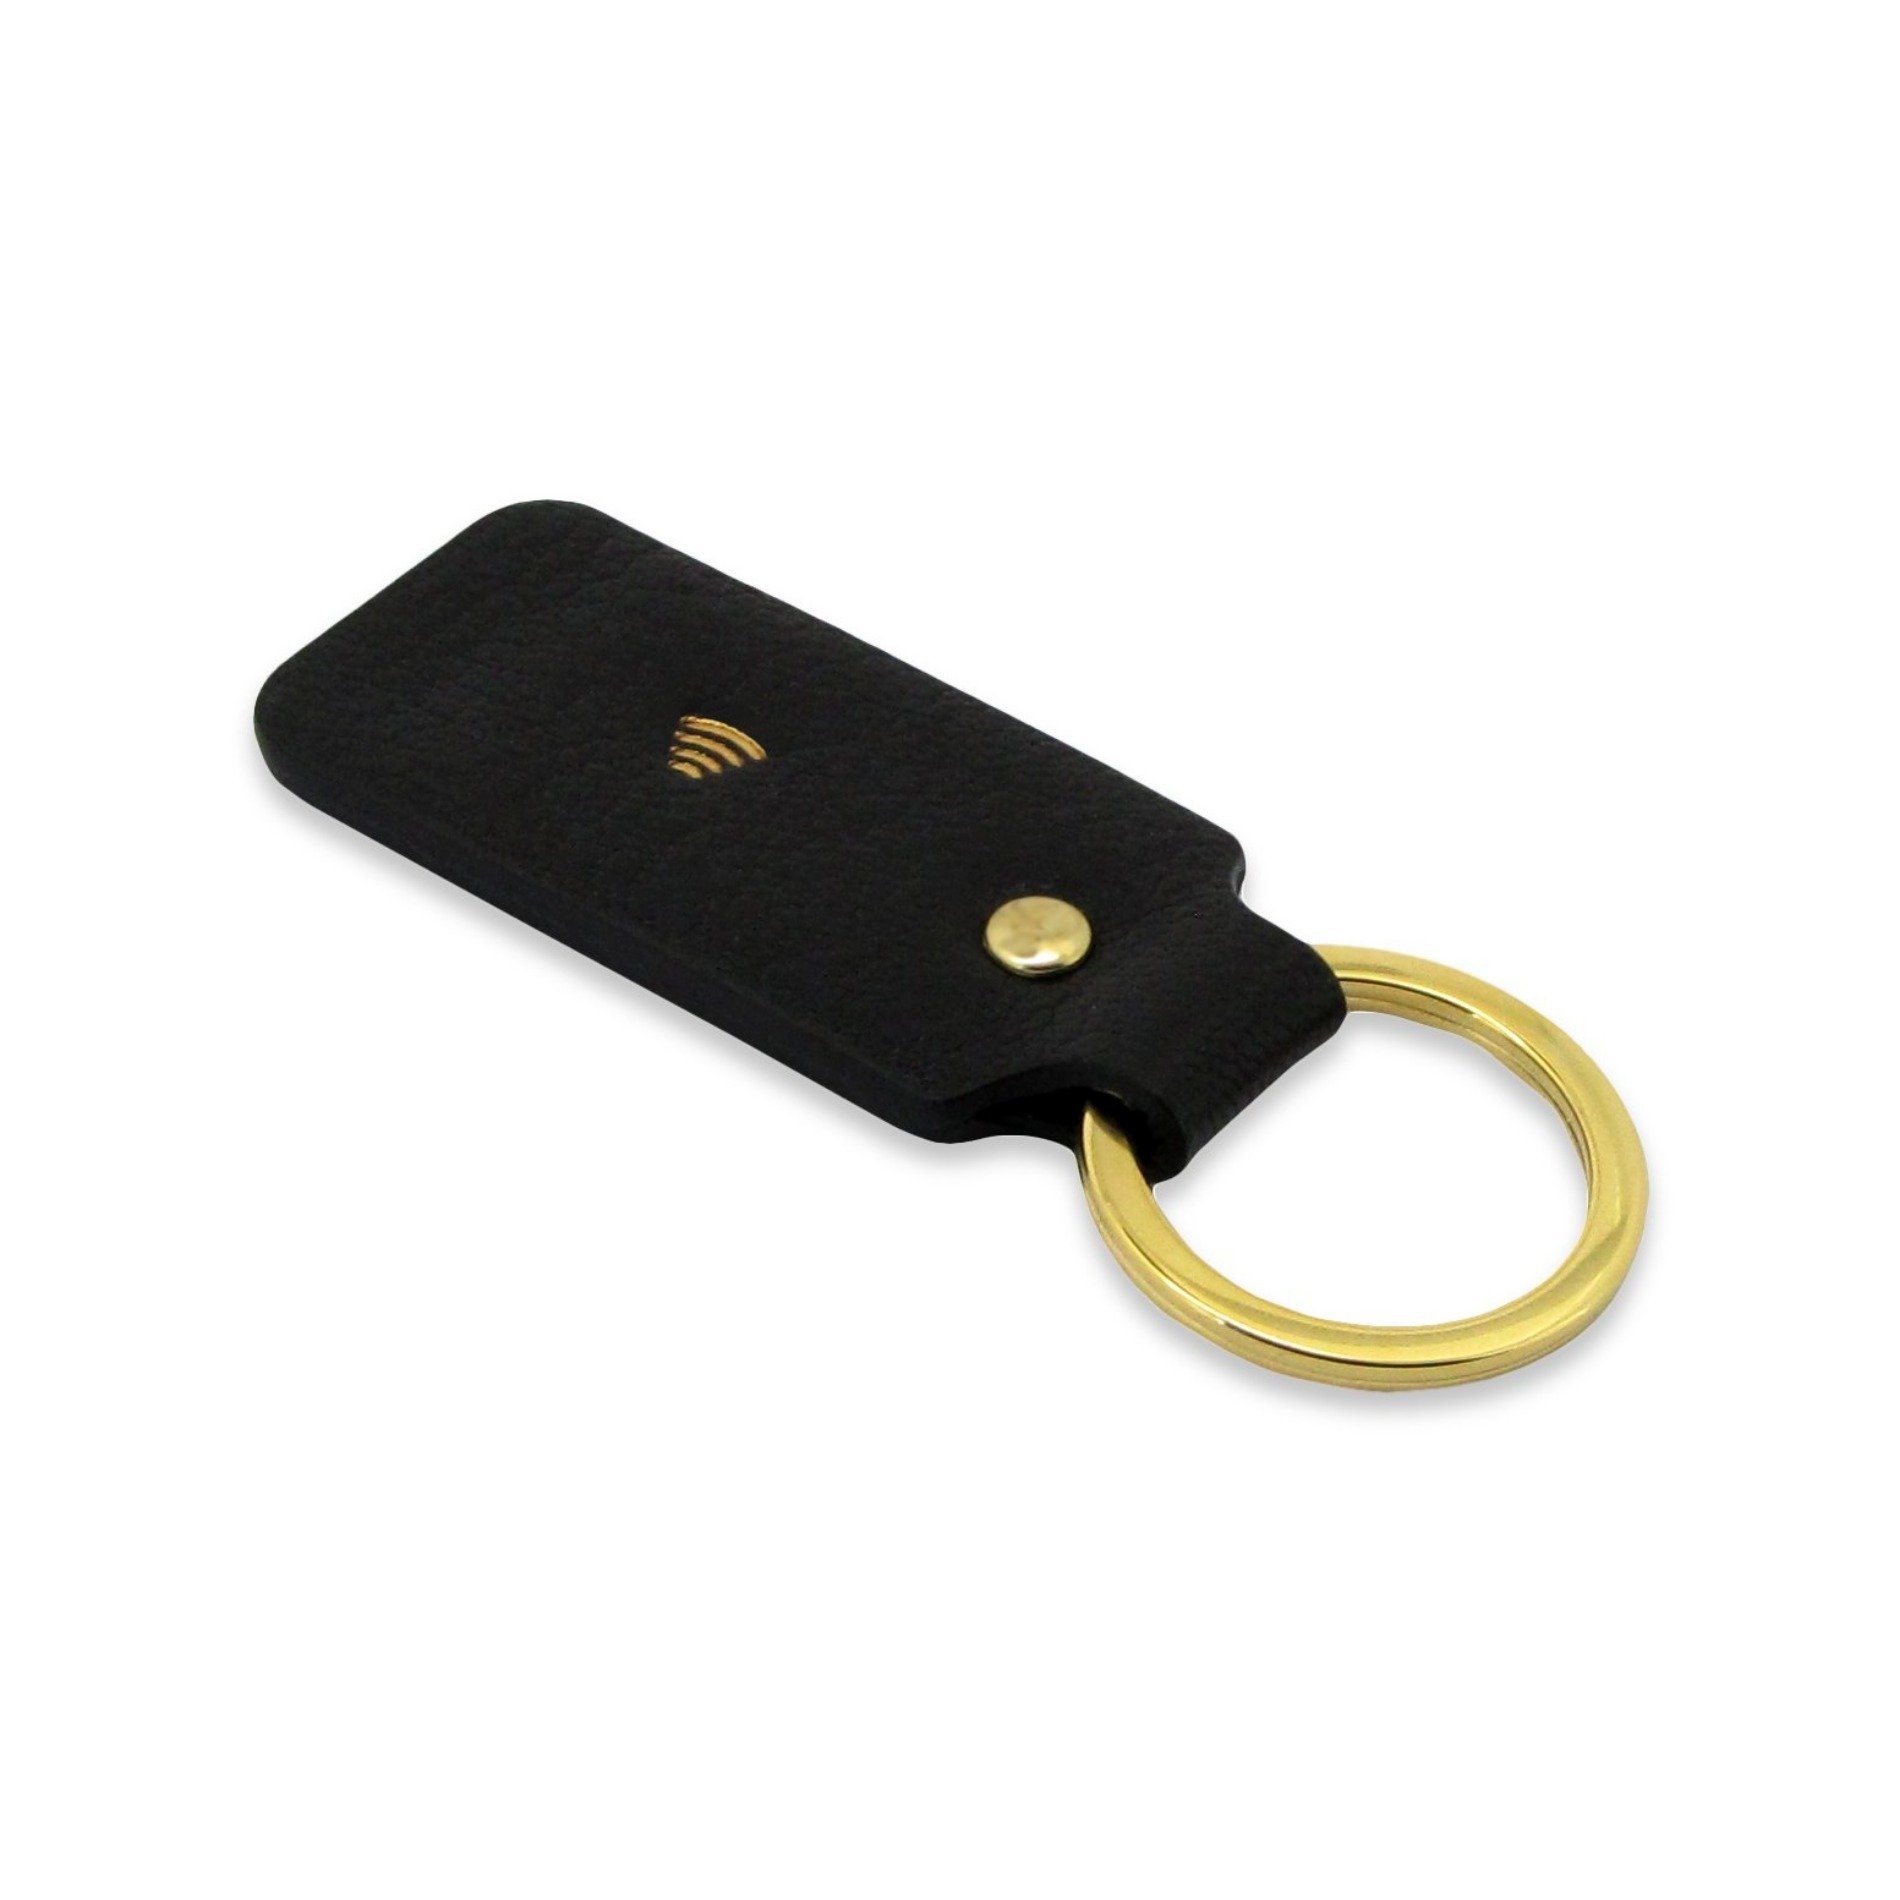 Leather Contactless Payment Key Fob – Black – With Contactless Payment Chip / Black